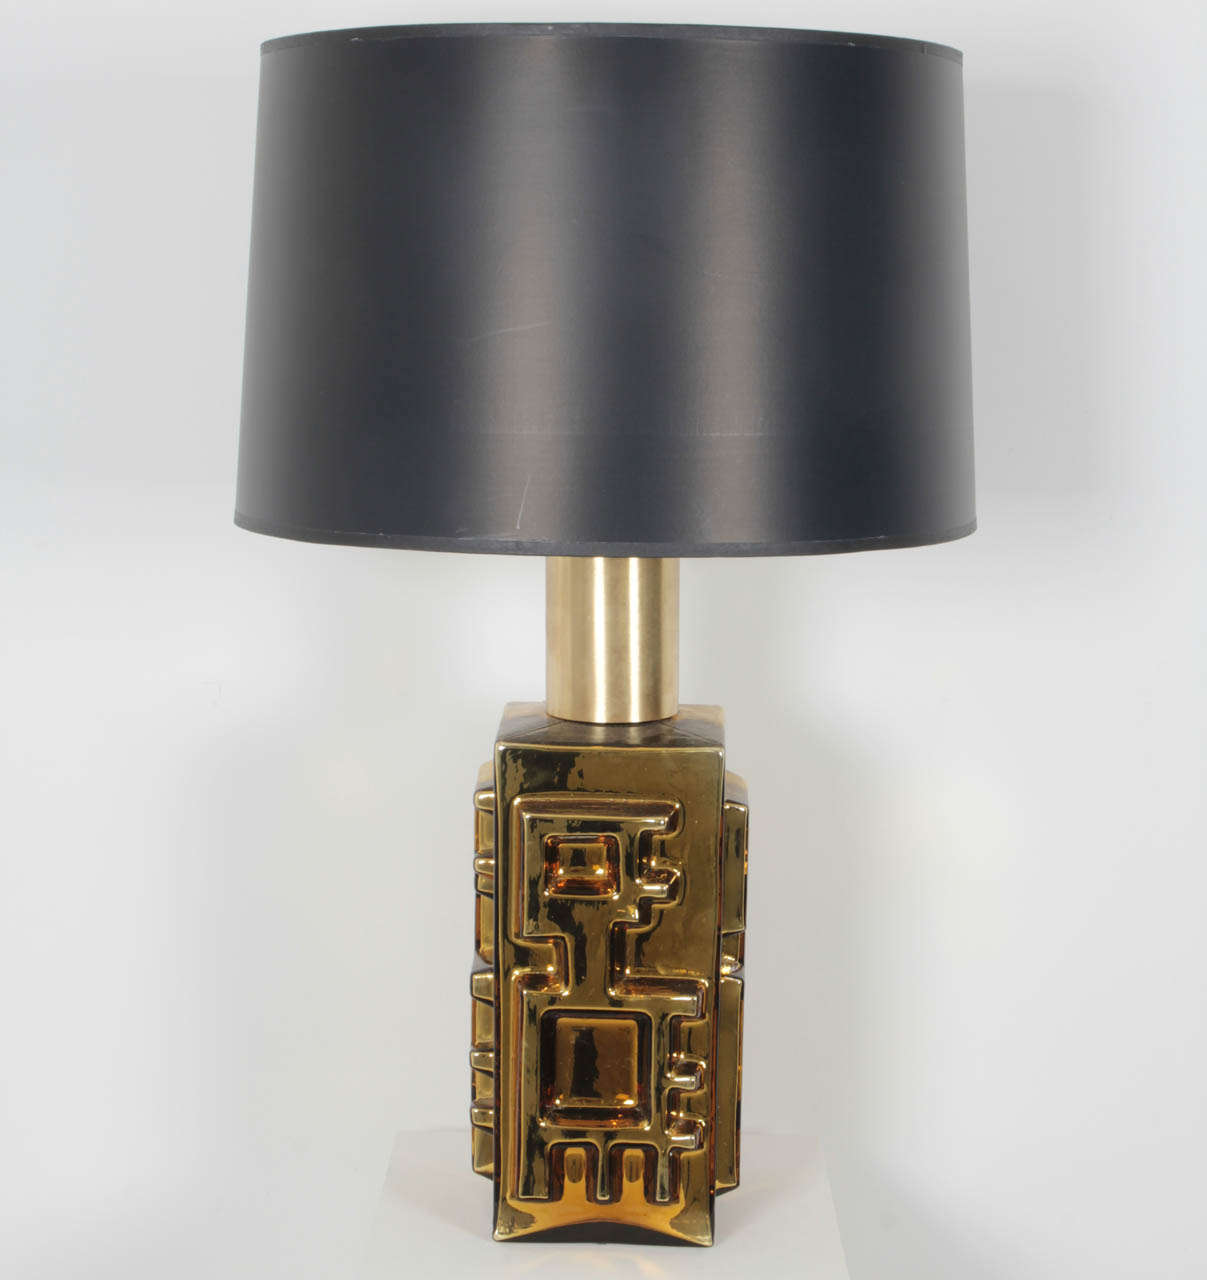 Fantastic pair of gold glass lamps with a 3D abstract relief design by Johanfors.